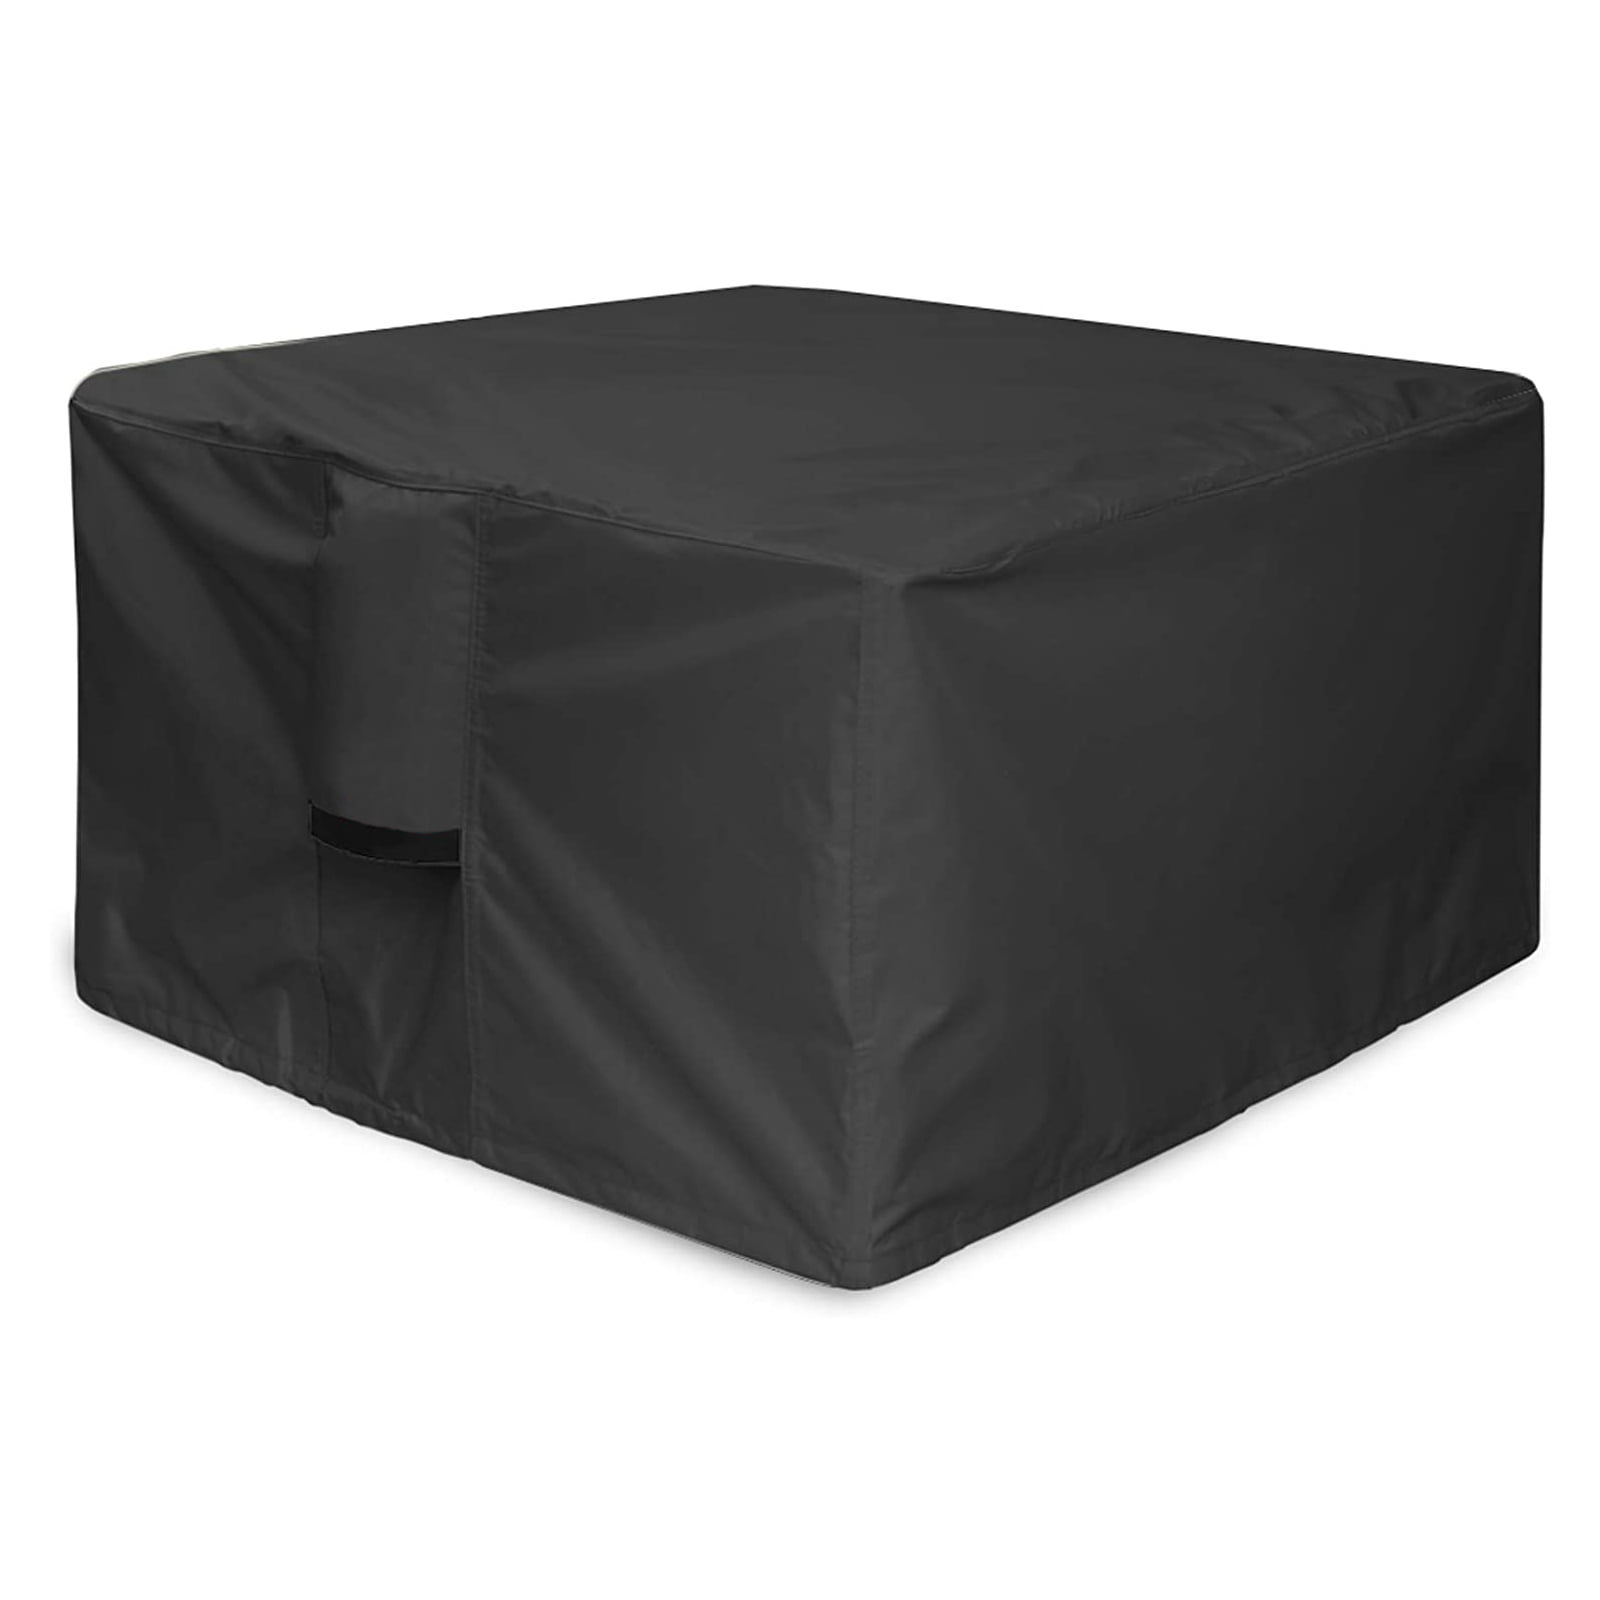 36" Square Fire Pit/Table Cover 210D Coating Patio Outdoor Cover Waterproof US 